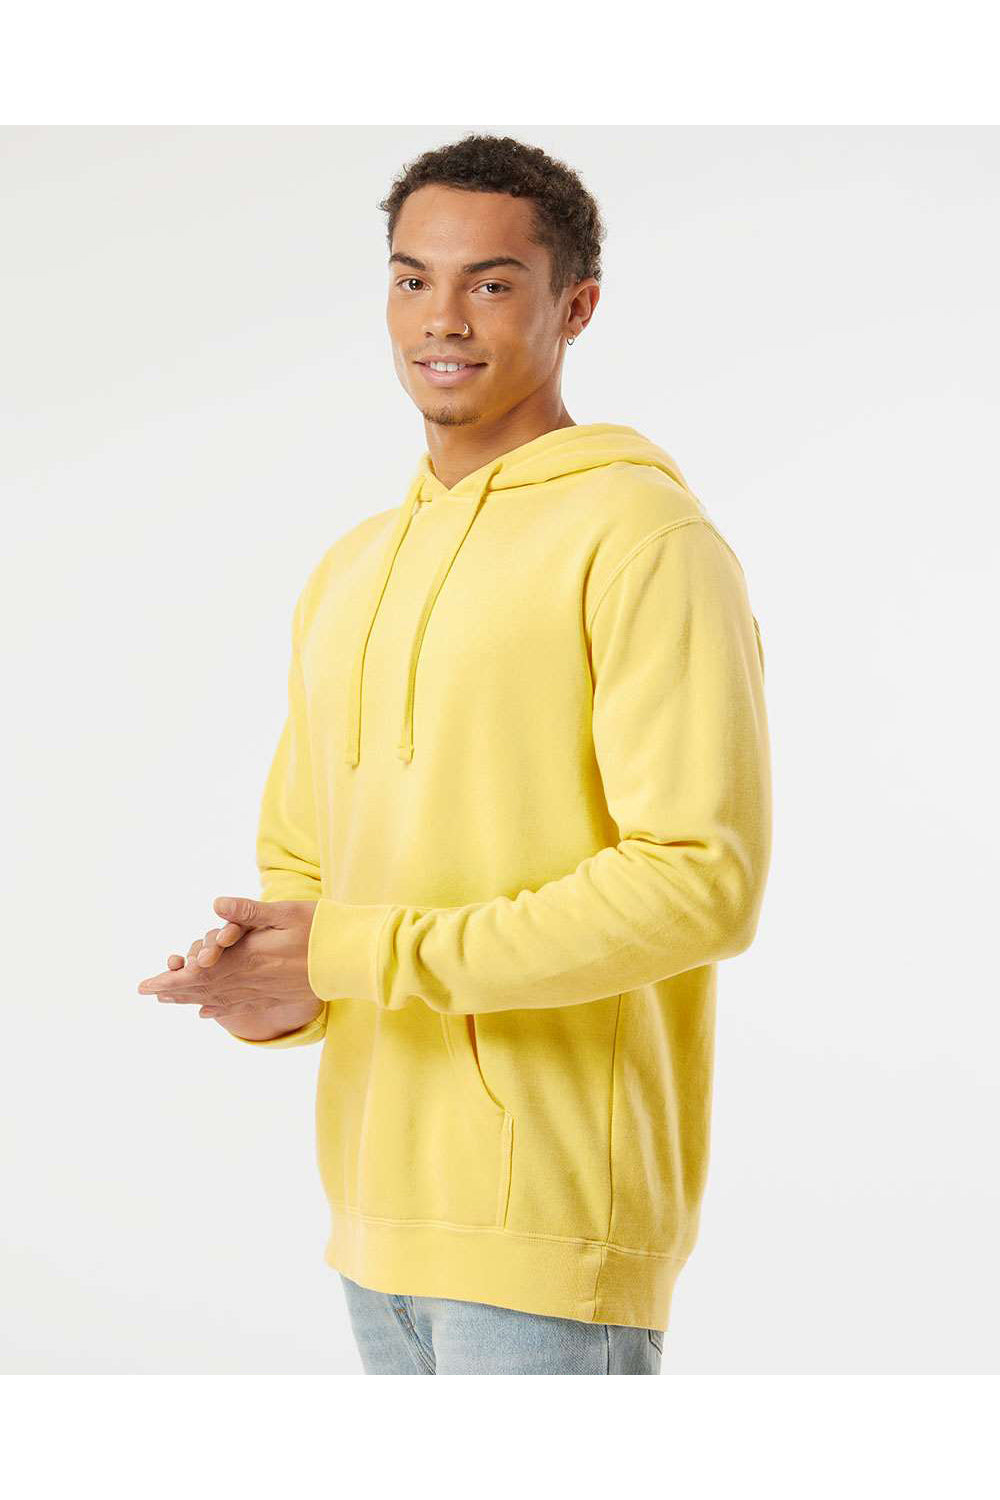 Independent Trading Co. PRM4500 Mens Pigment Dyed Hooded Sweatshirt Hoodie Yellow Model Side